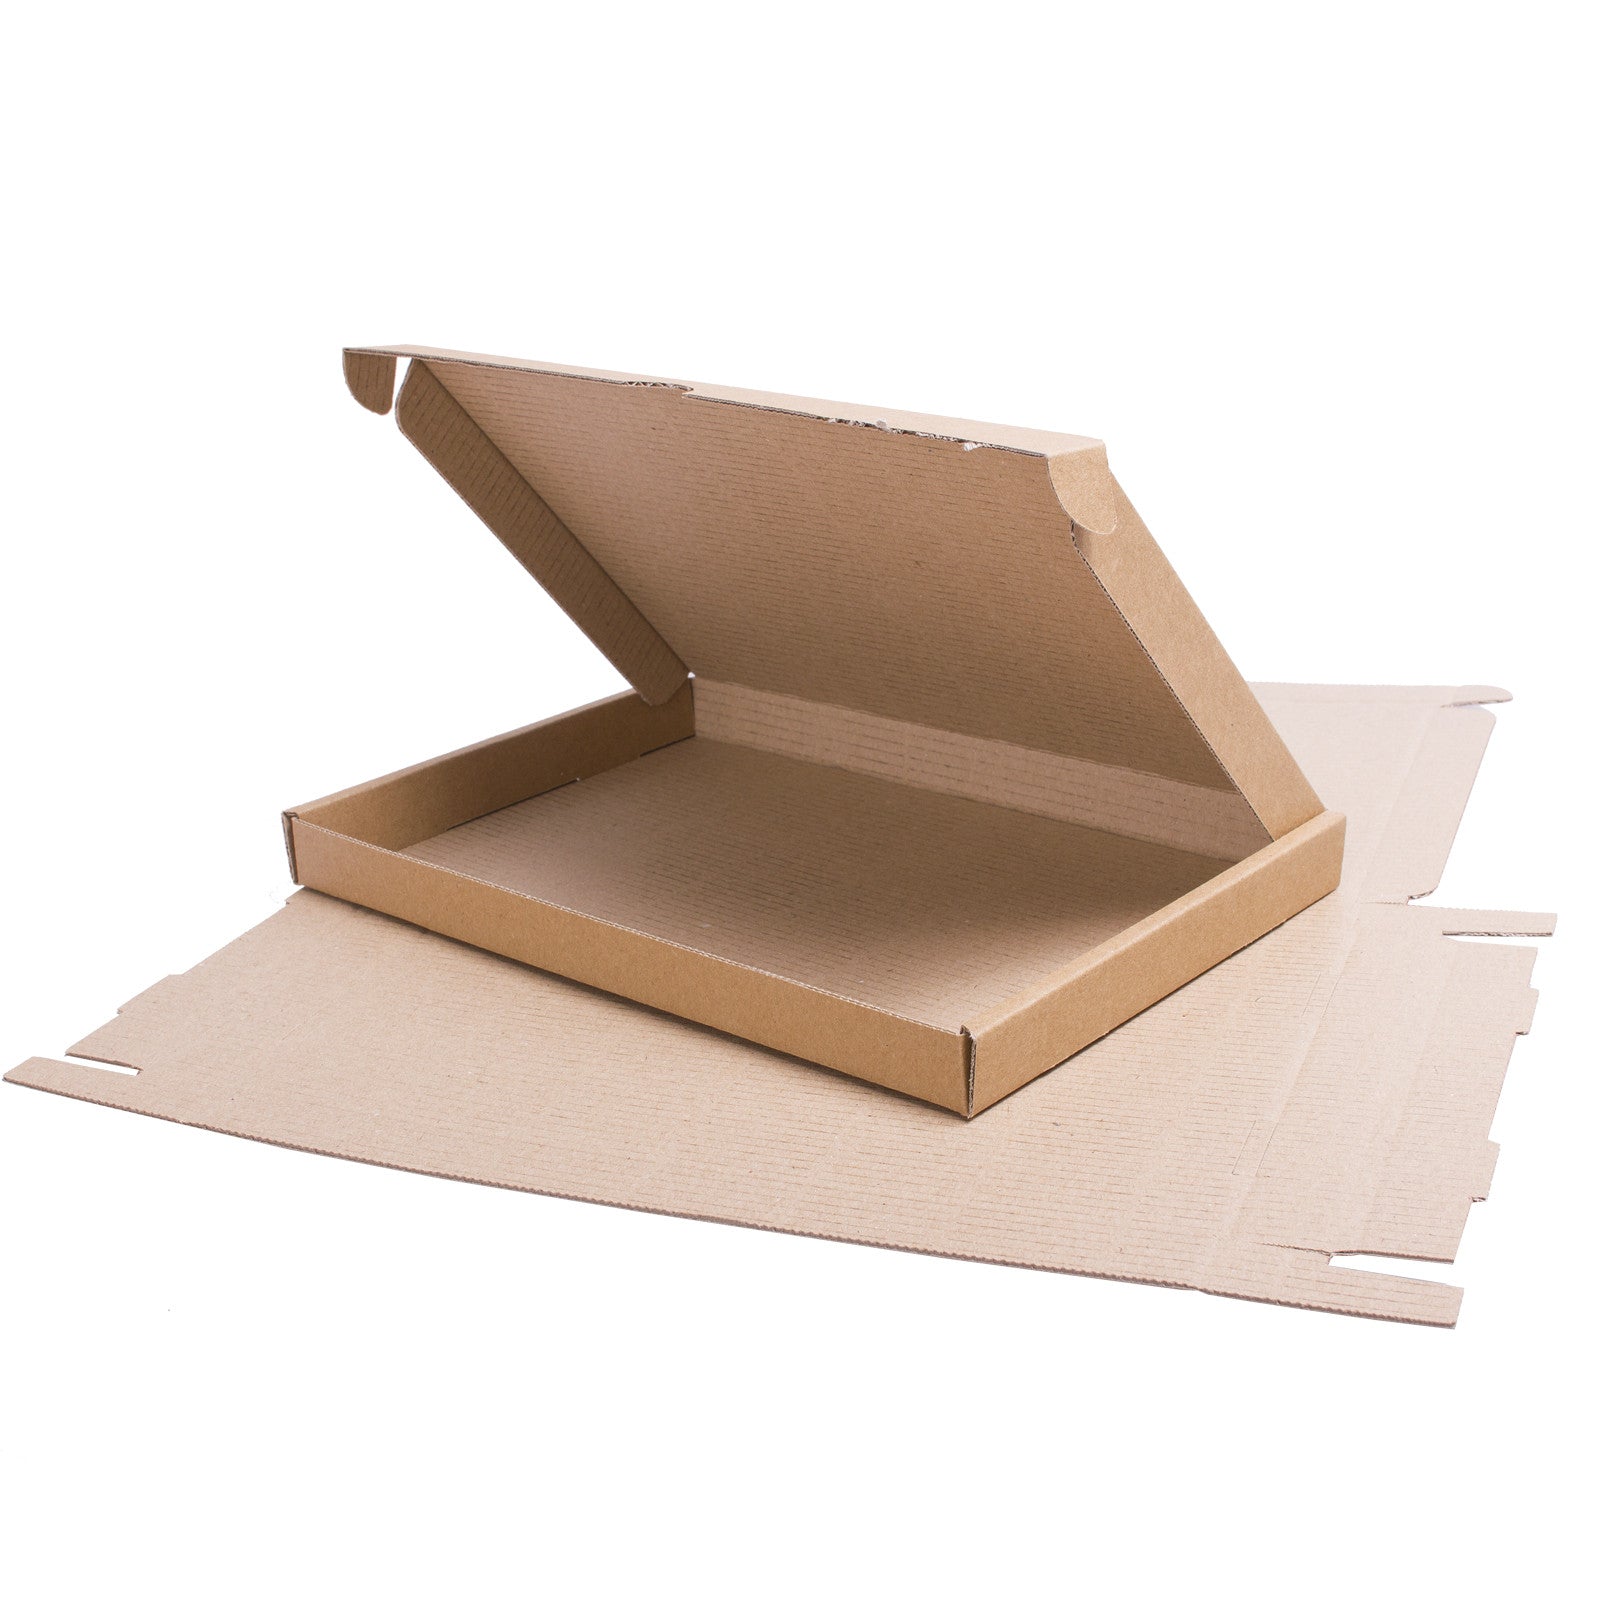 C5/A5 Royal Mail Large Letter PiP Cardboard Boxes,SR Mailing,